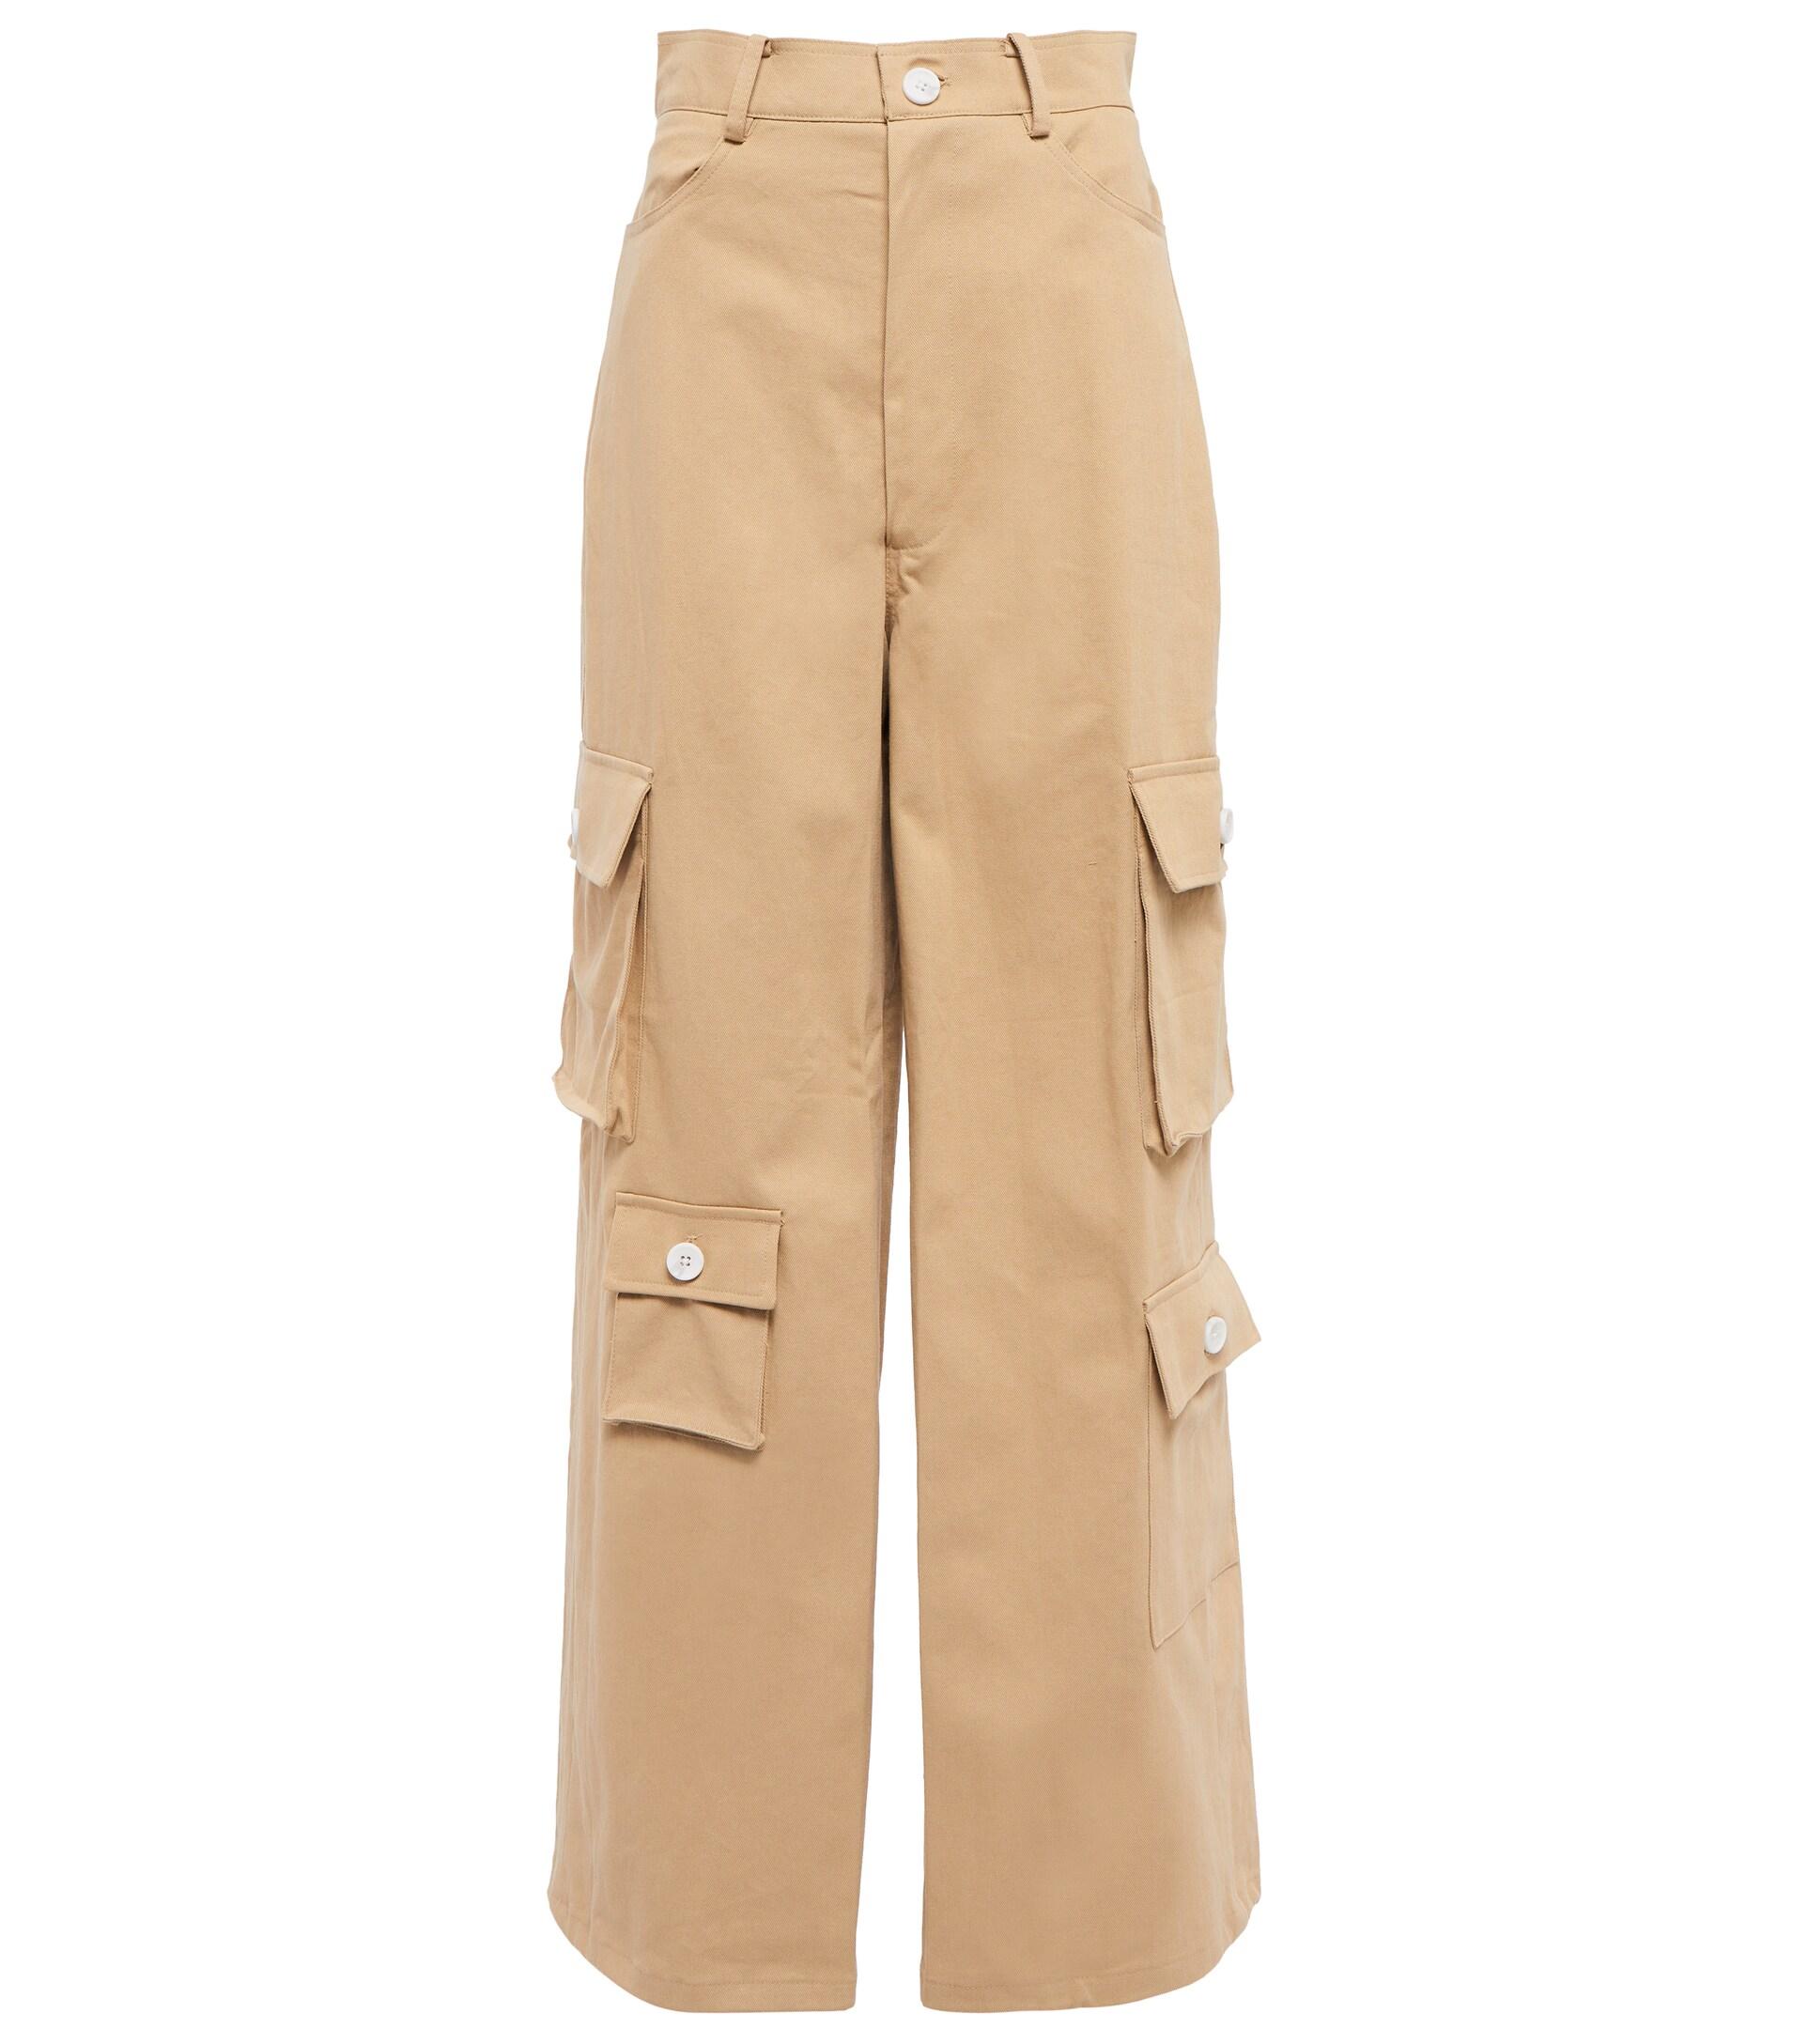 Frankie Shop Hailey High-rise Cotton Cargo Pants in Natural | Lyst